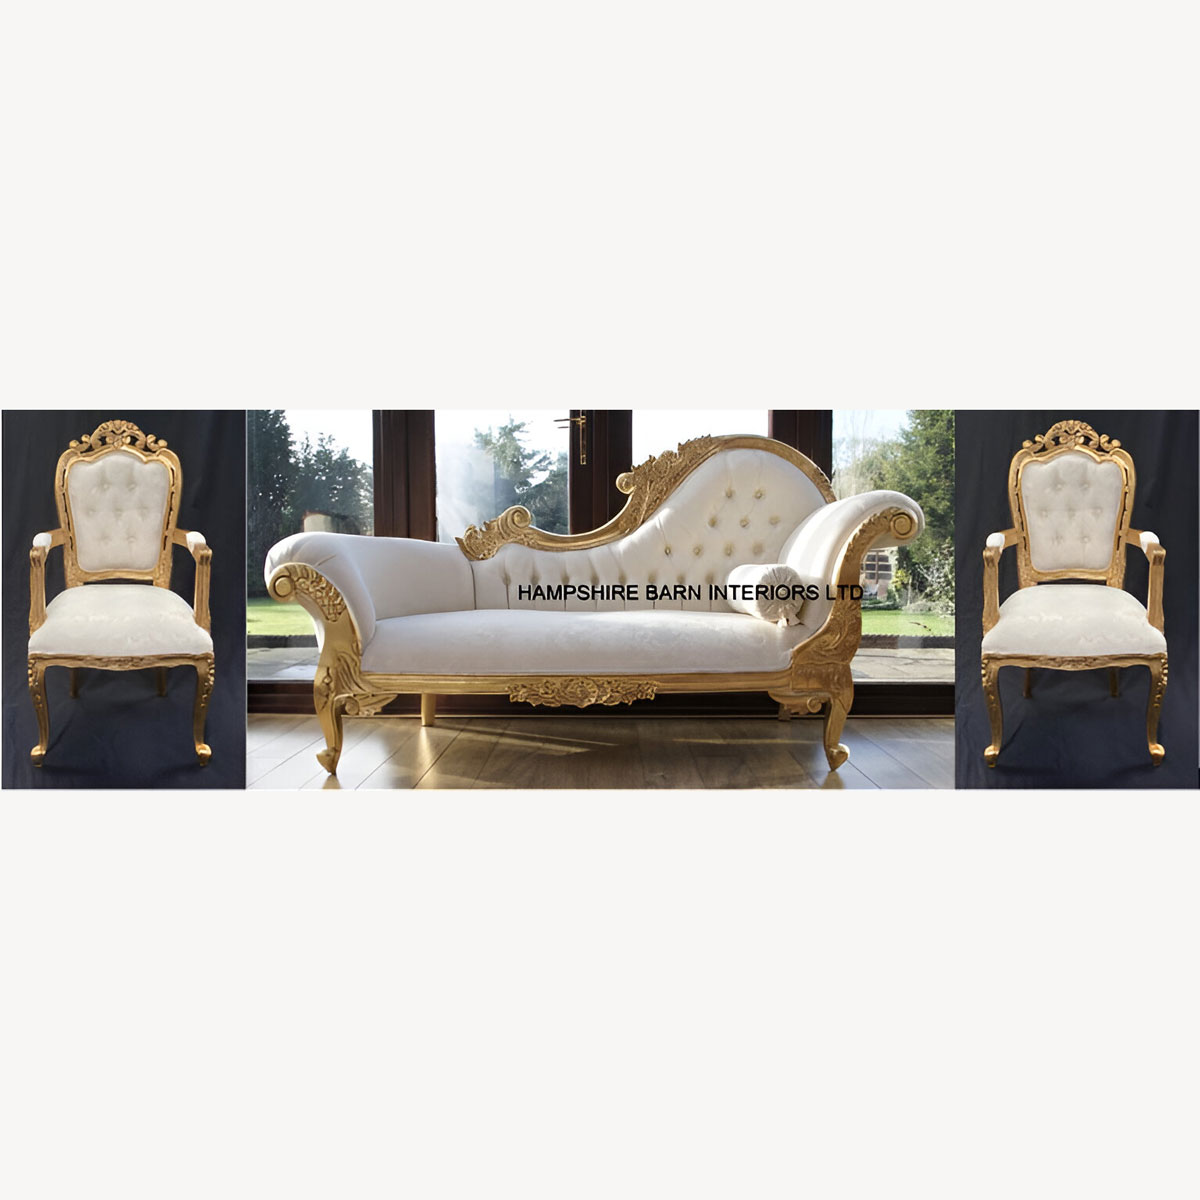 Hampshire Wedding Set Comprising One Chaise Plus Two Franciscan Chairs With Arms Gold Leaf – Ivory Cream Fabric With Crystals - Hampshire Barn Interiors - Hampshire Wedding Set Comprising One Chaise Plus Two Franciscan Chairs With Arms Gold Leaf – Ivory Cream Fabric With Crystals -